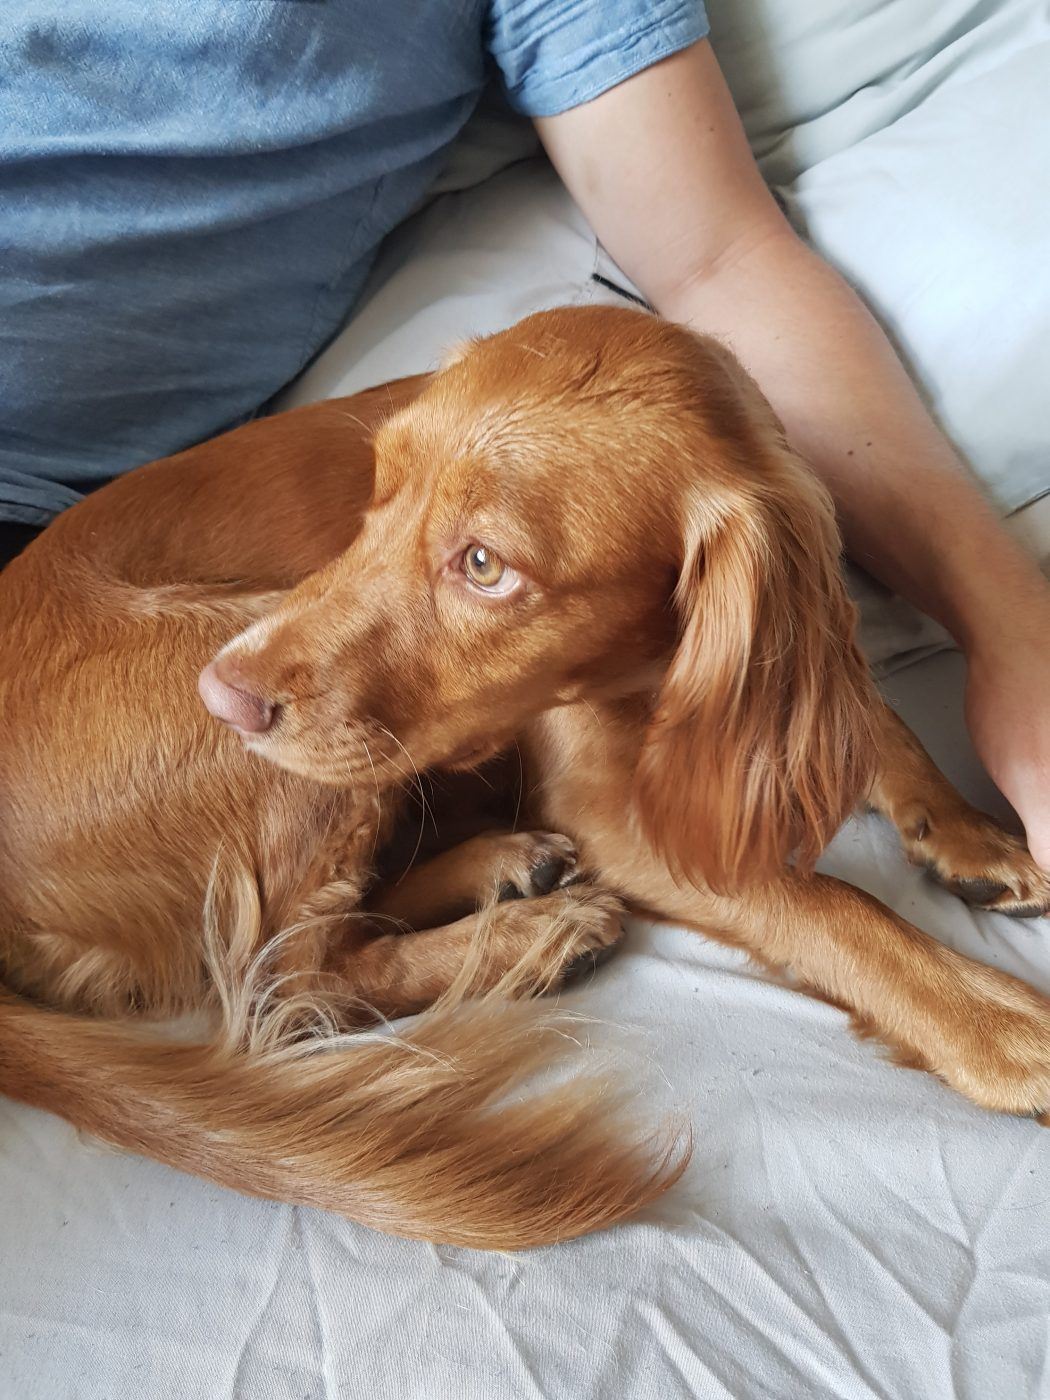 Red-haired Cocker Spaniel curled up next to her owner